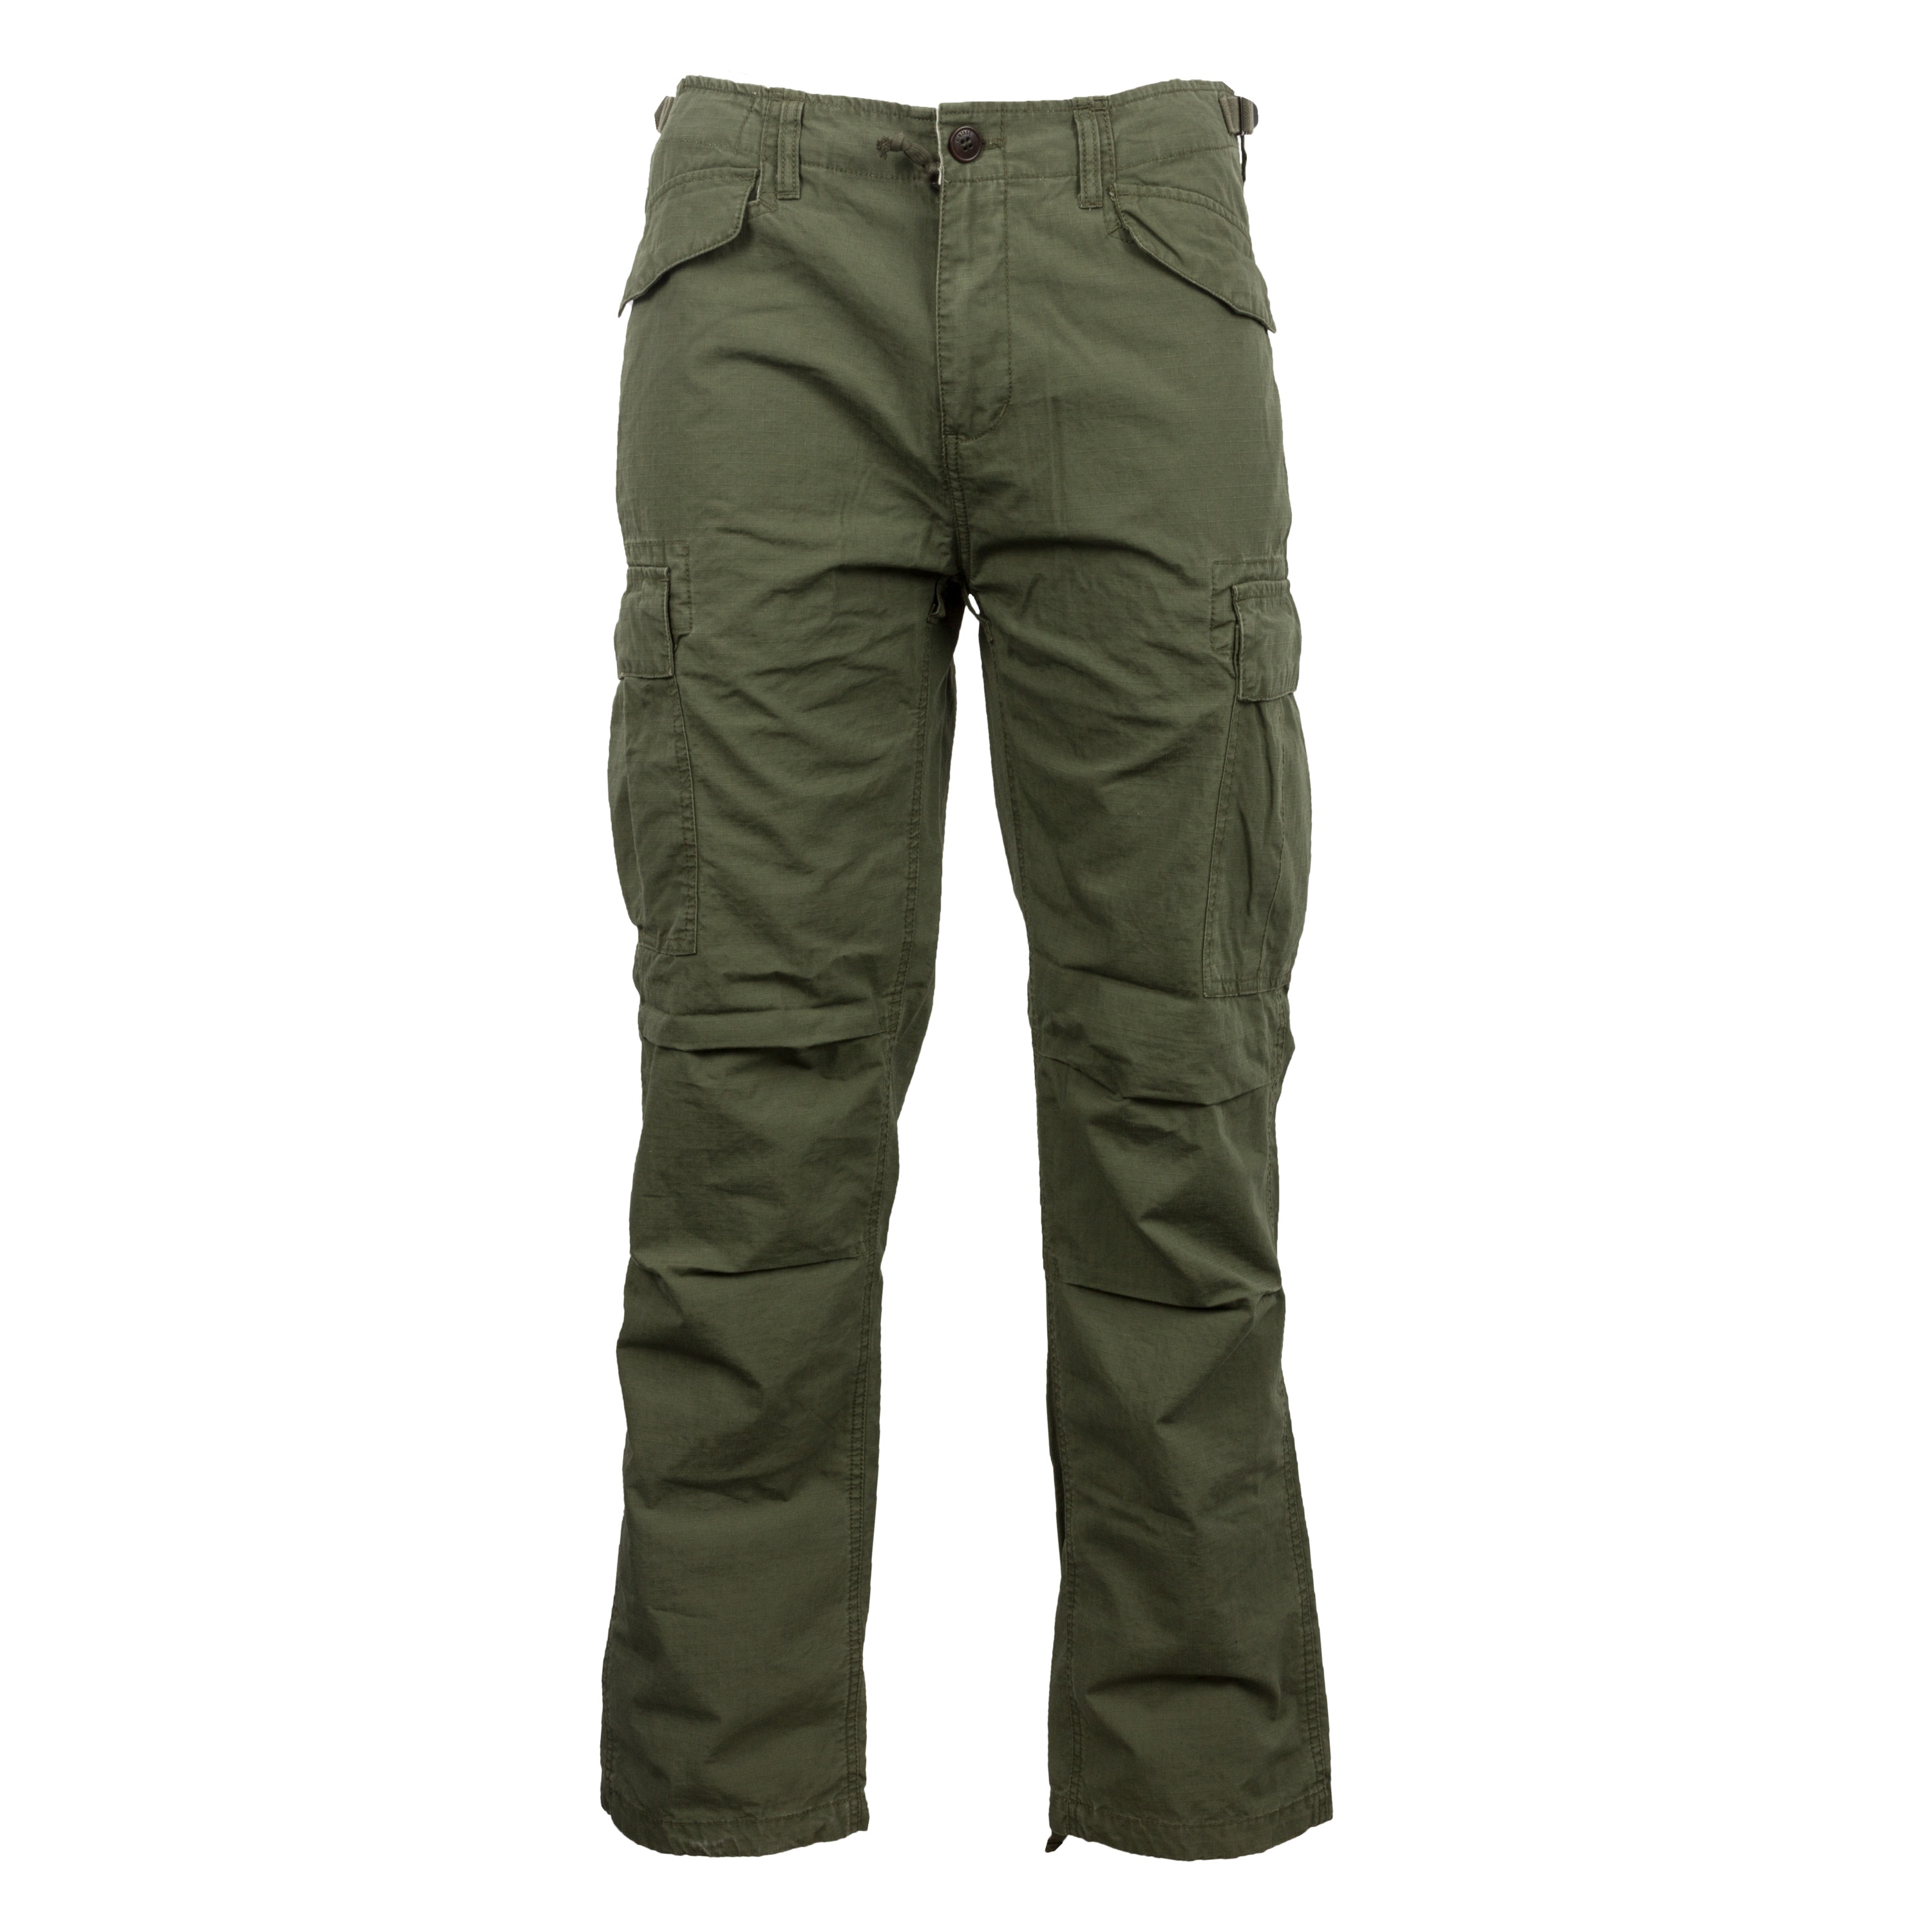 Purchase the Vintage Industries Miller M65 Pants olive by ASMC